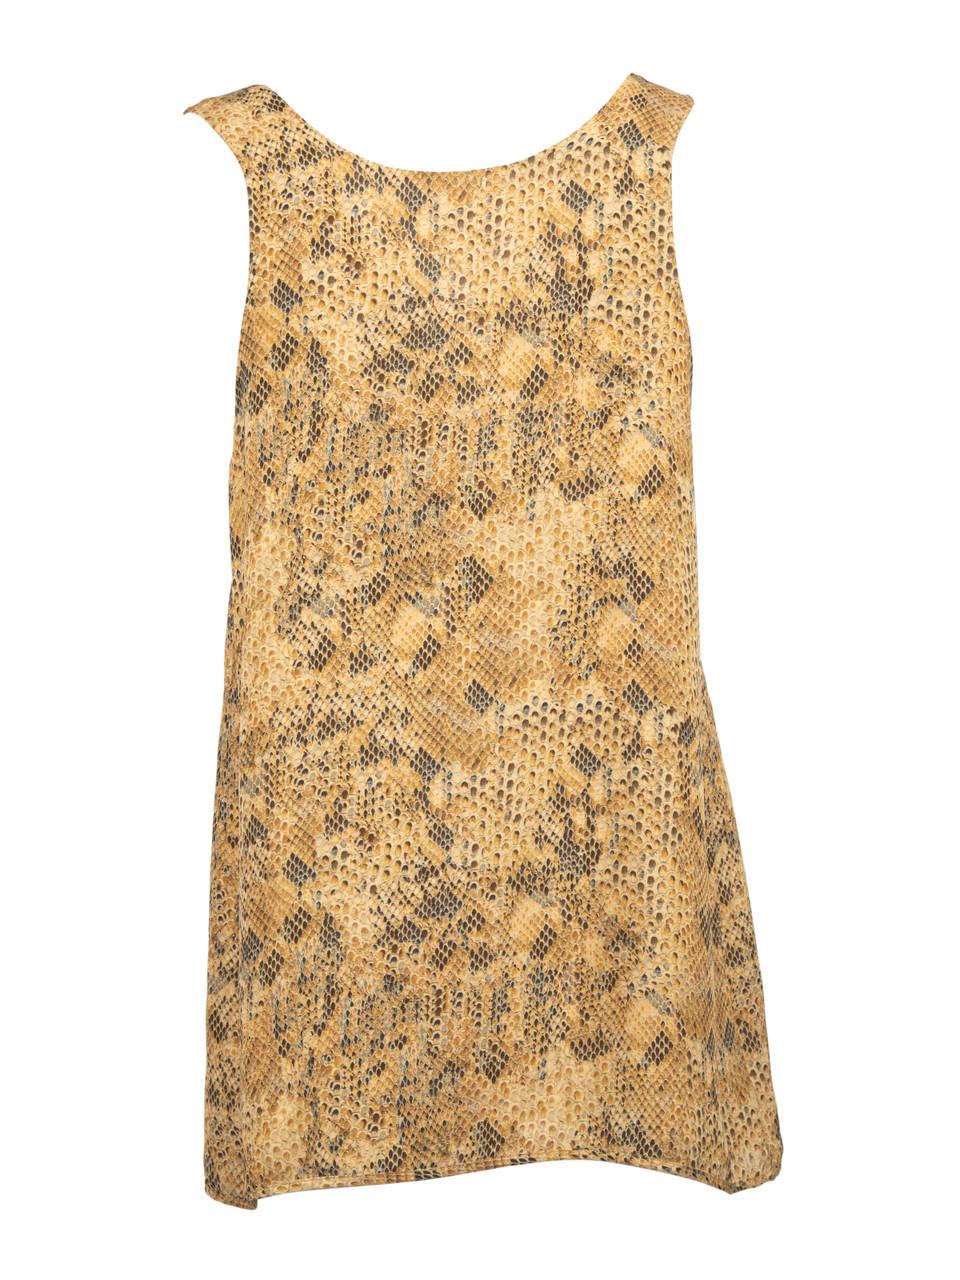 Snakeskin Pattern Silk Sleeveless Top Size L In Good Condition In London, GB